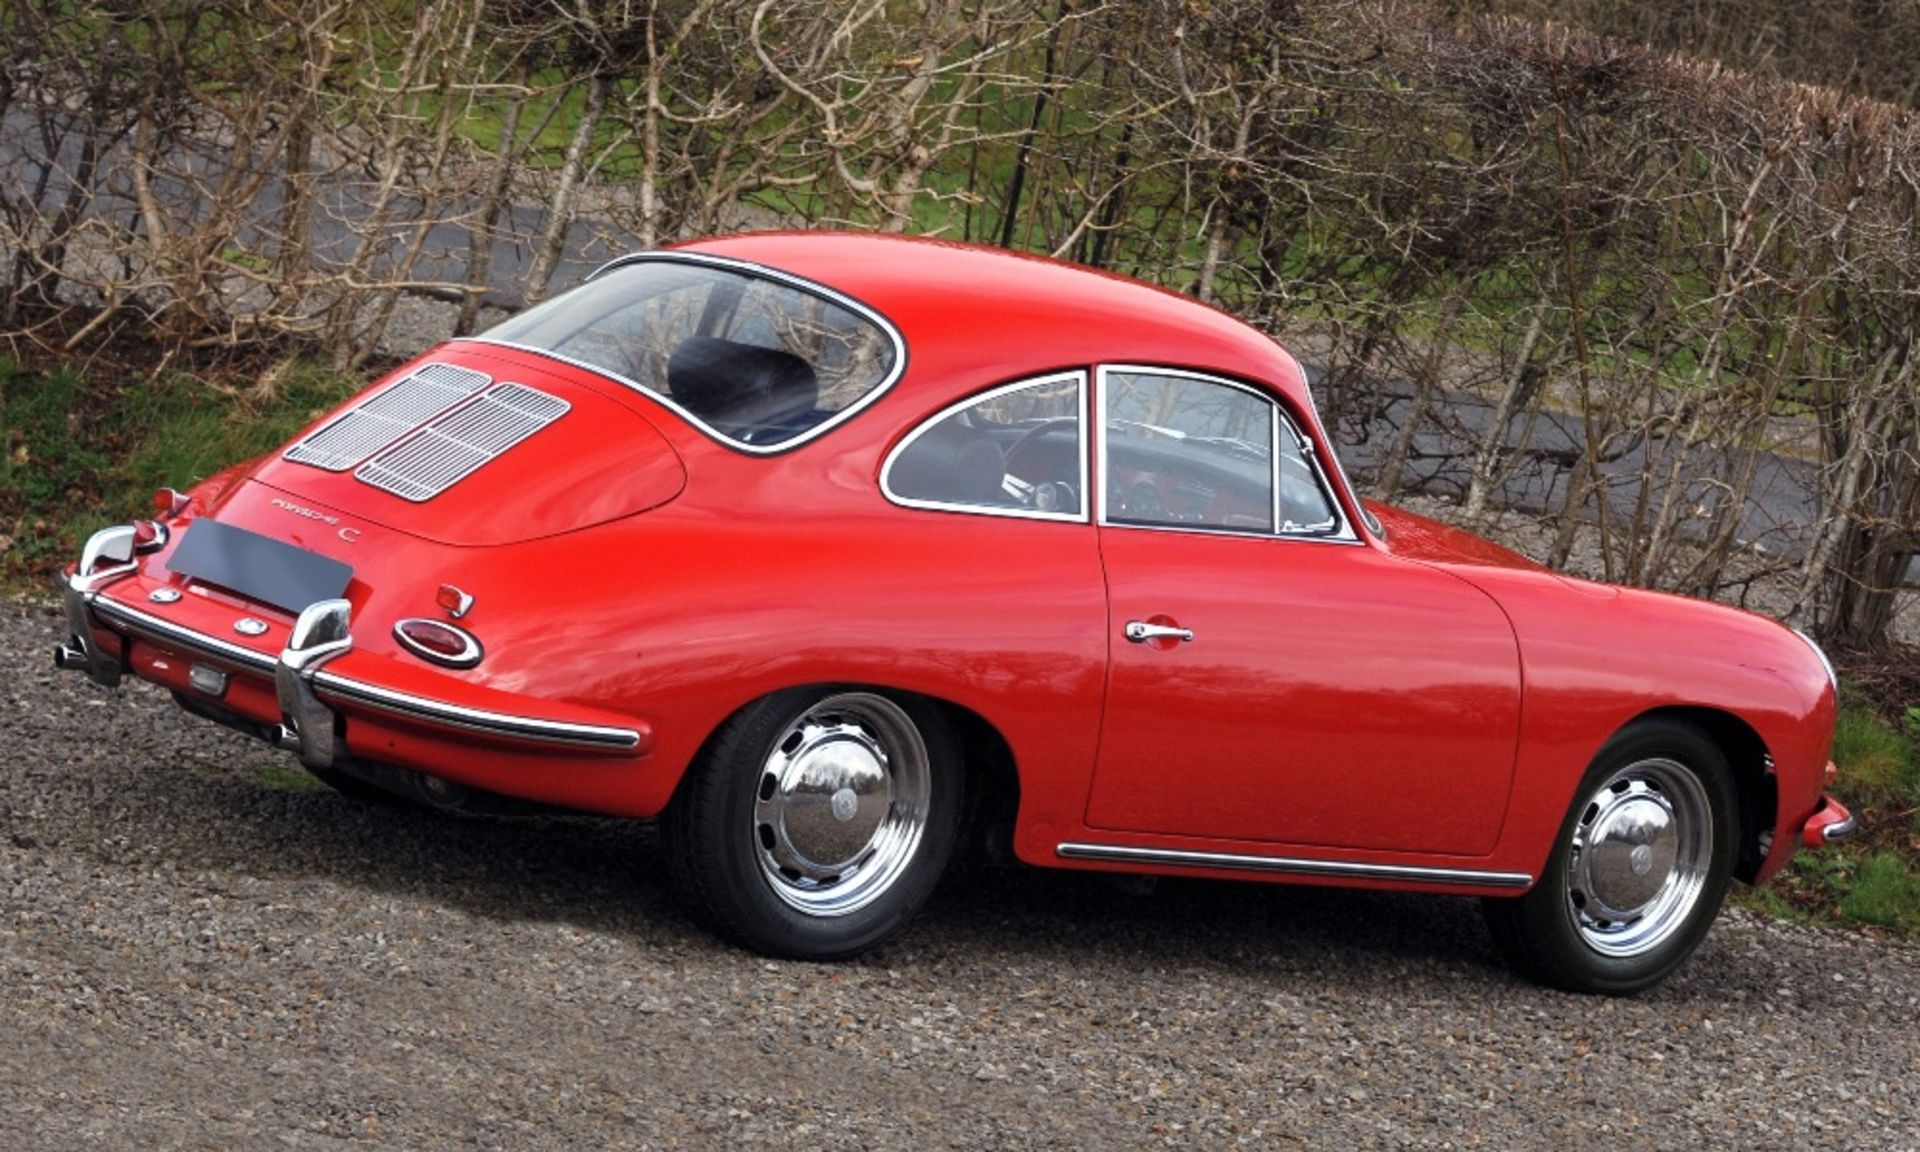 1964 PORSCHE 356 C COUPE BY KARMANN           Registration Number: DHJ 606B              Chassis - Image 4 of 14